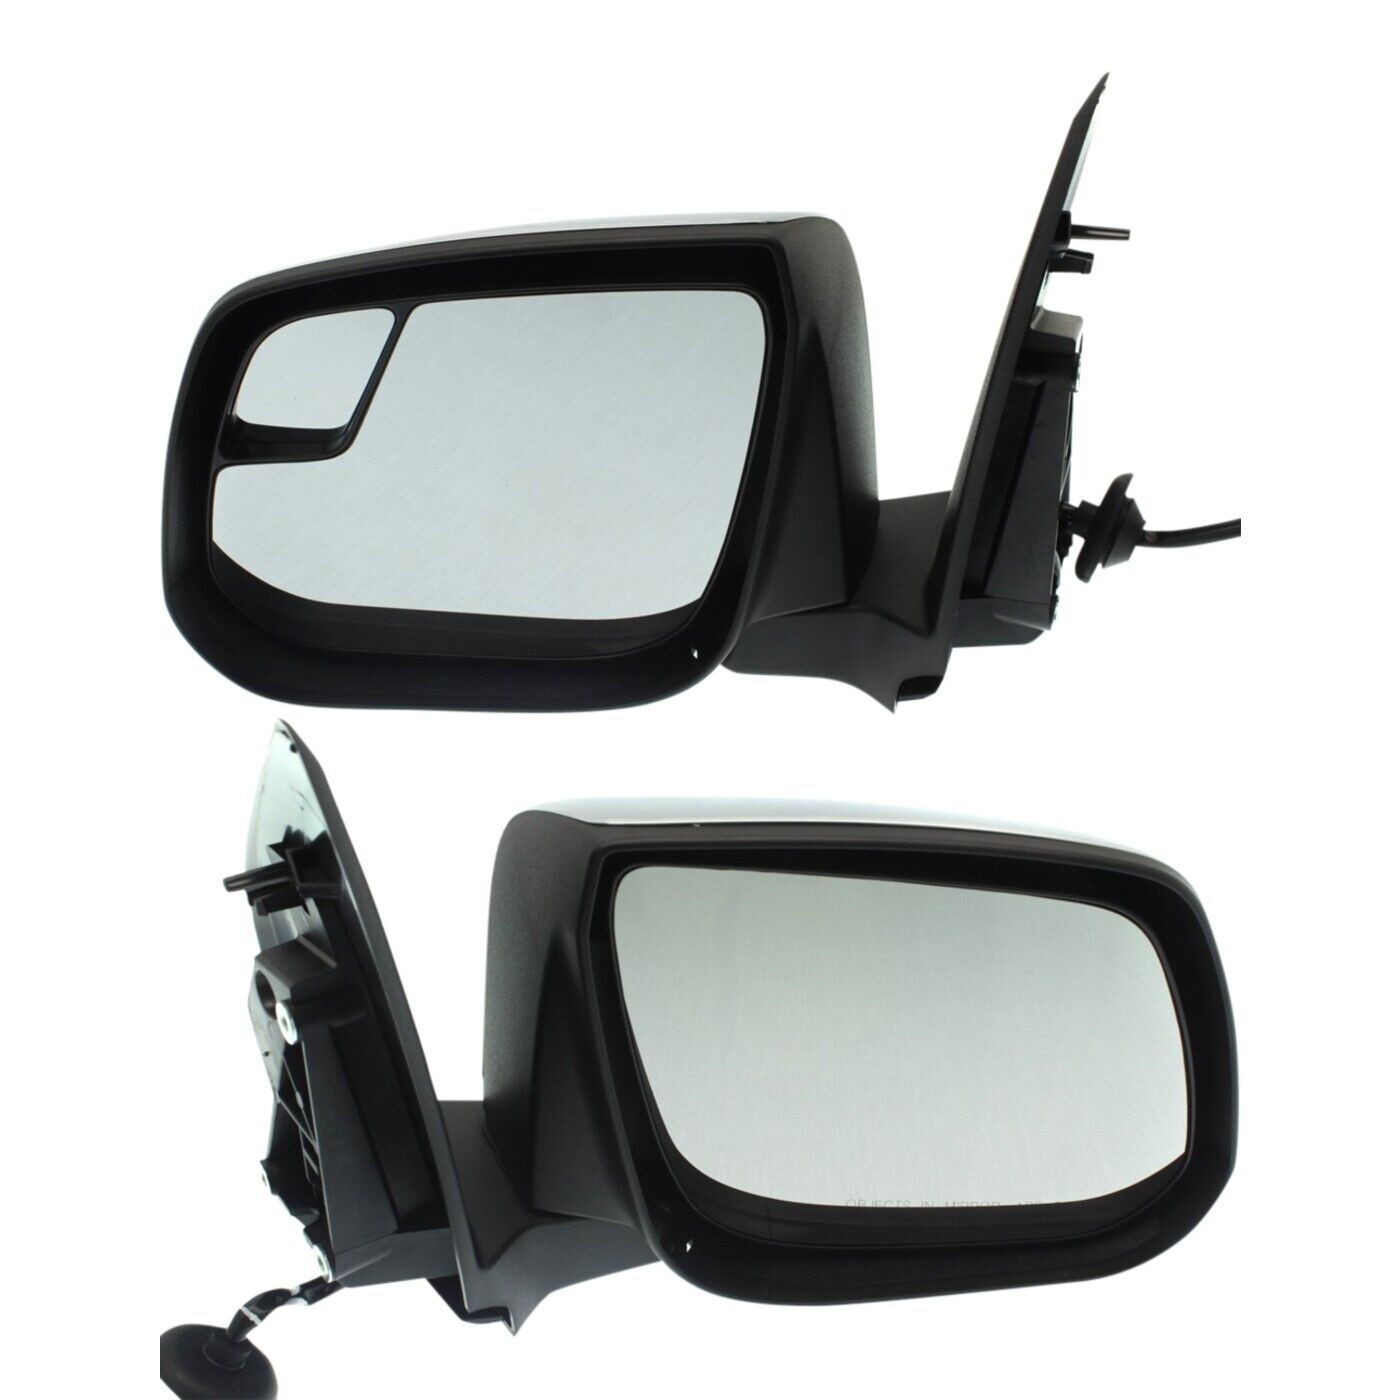 Mirror For 2015-2016 Chevrolet Colorado Driver and Passenger Side Set of 2